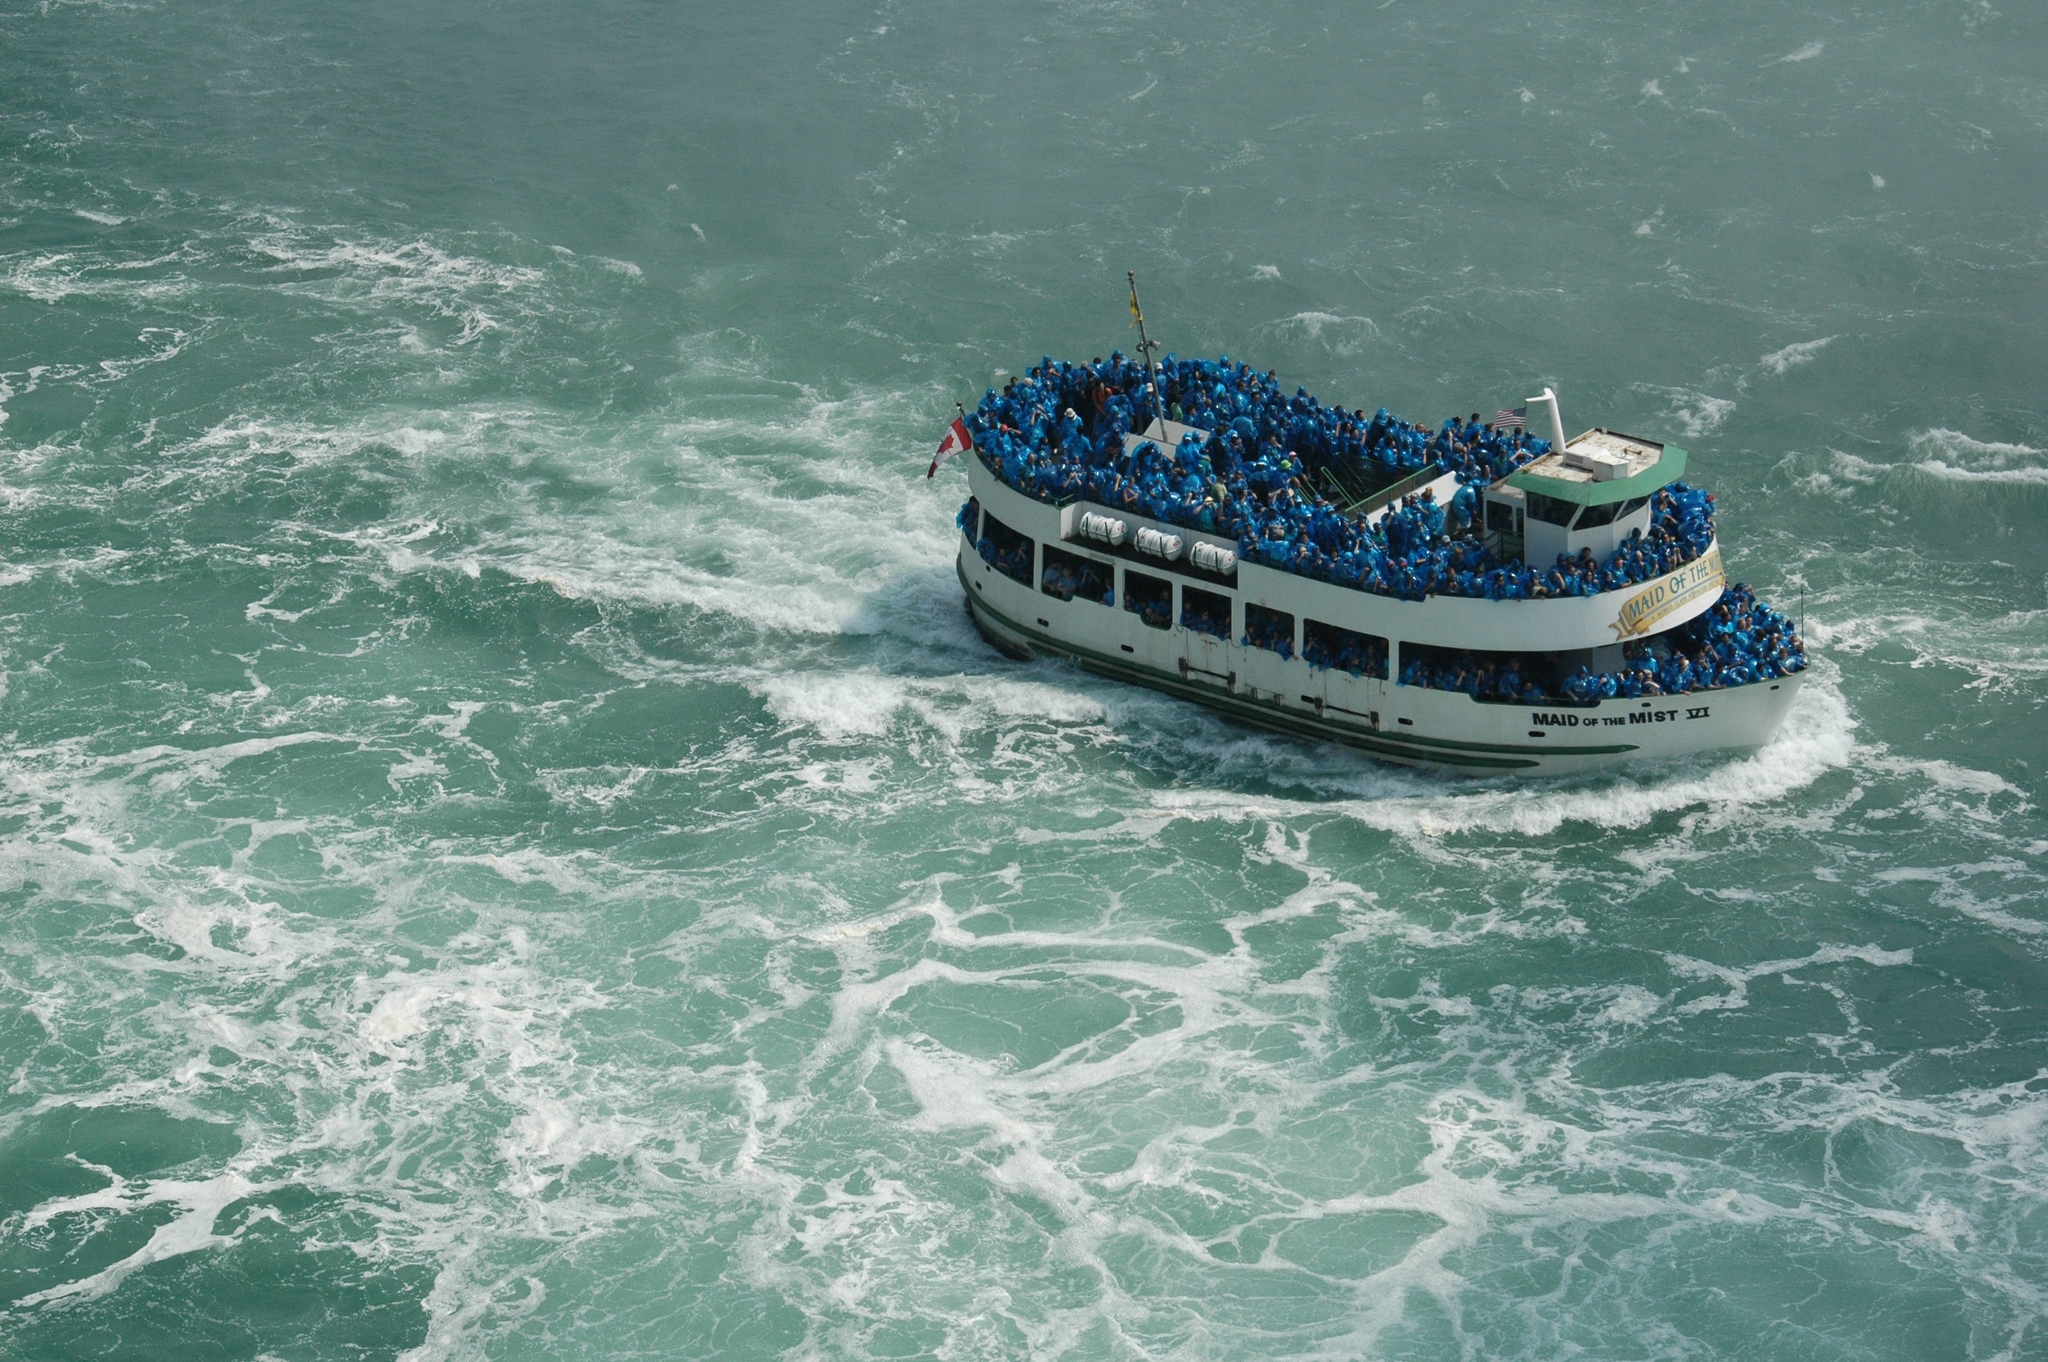 https://res.cloudinary.com/see-sight-tours/image/upload/v1581439875/maid-of-the-mist-closeup.jpg